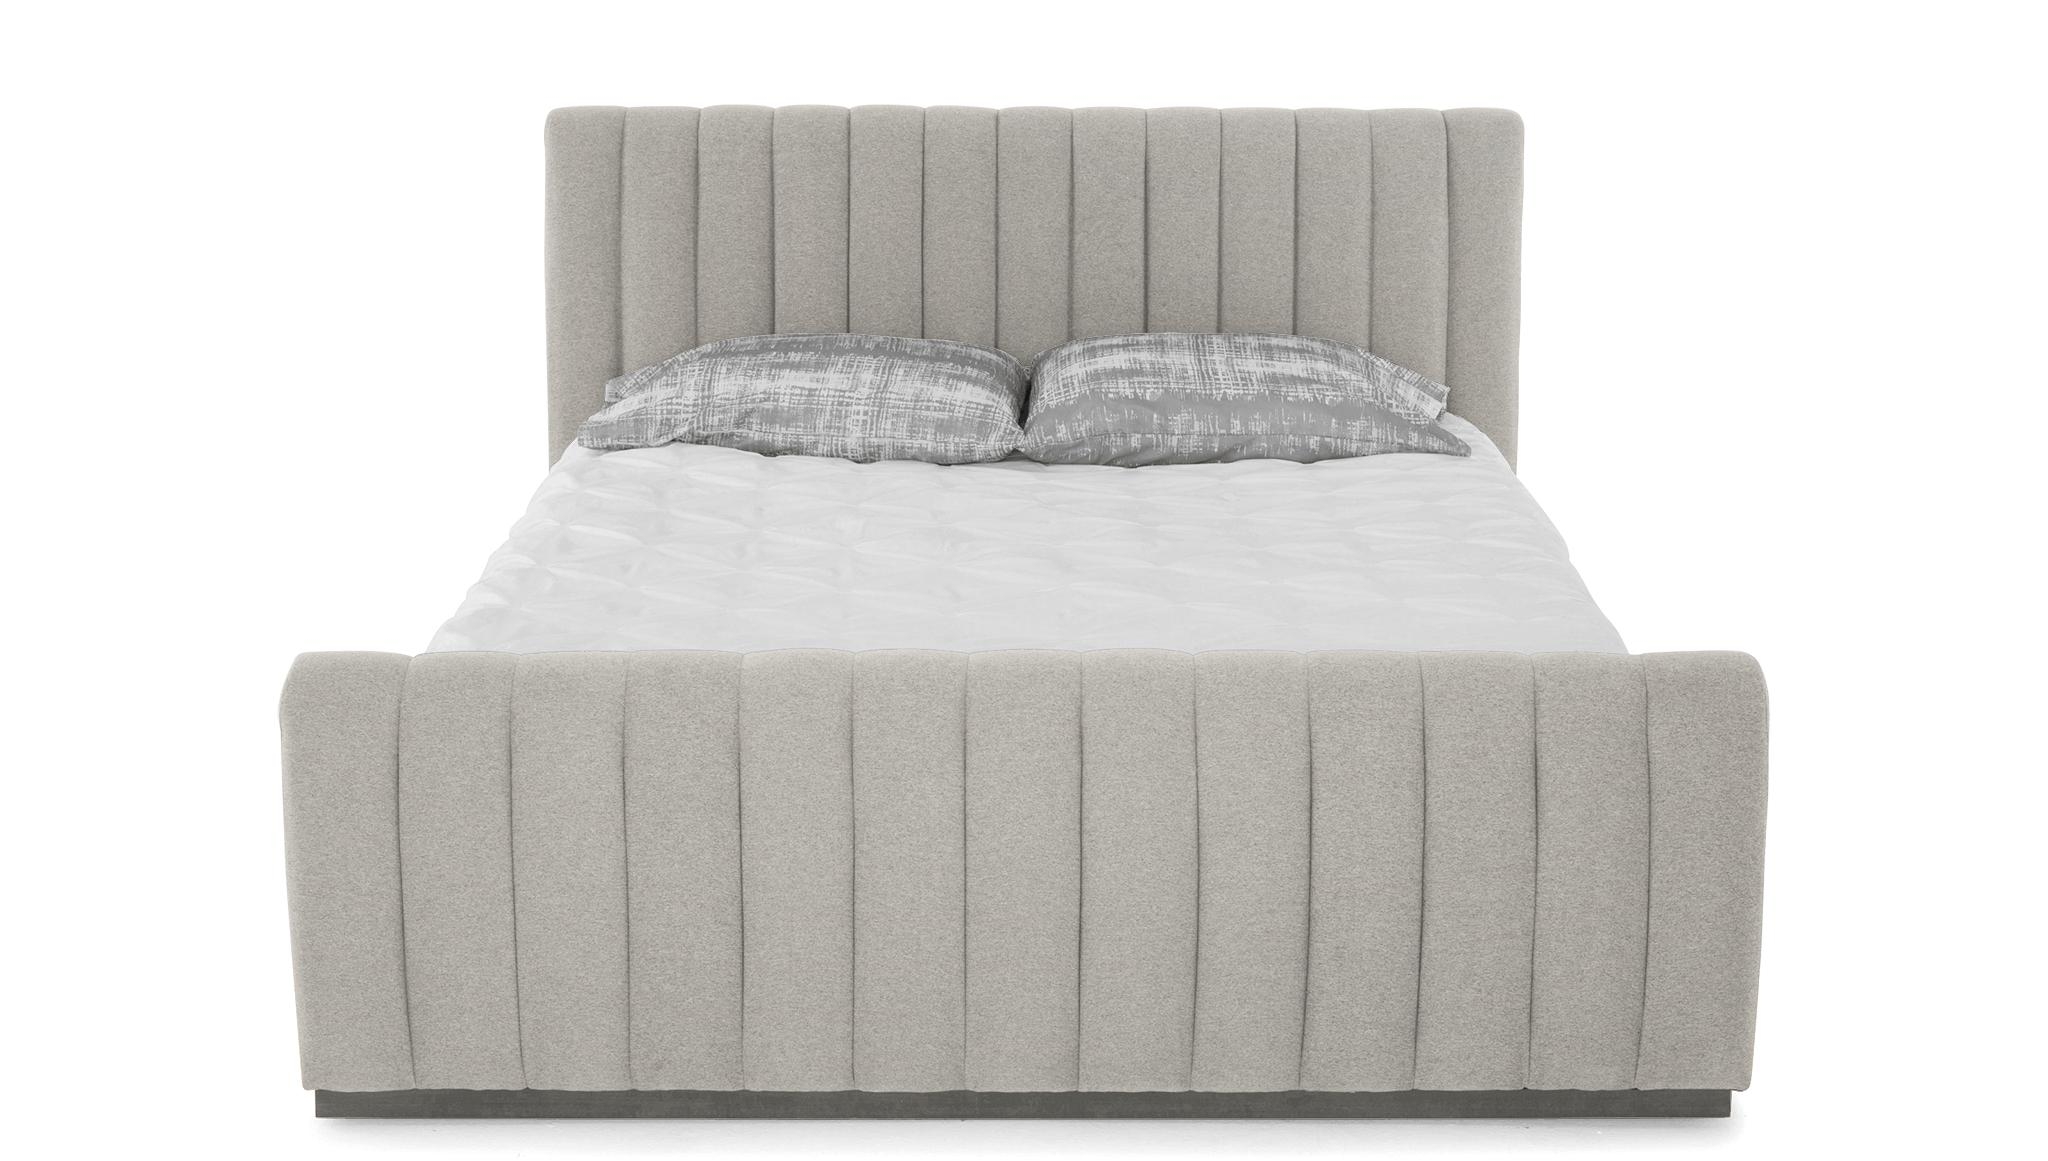 White Camille Mid Century Modern Bed - Bloke Cotton - Mocha - Queen - Image 0